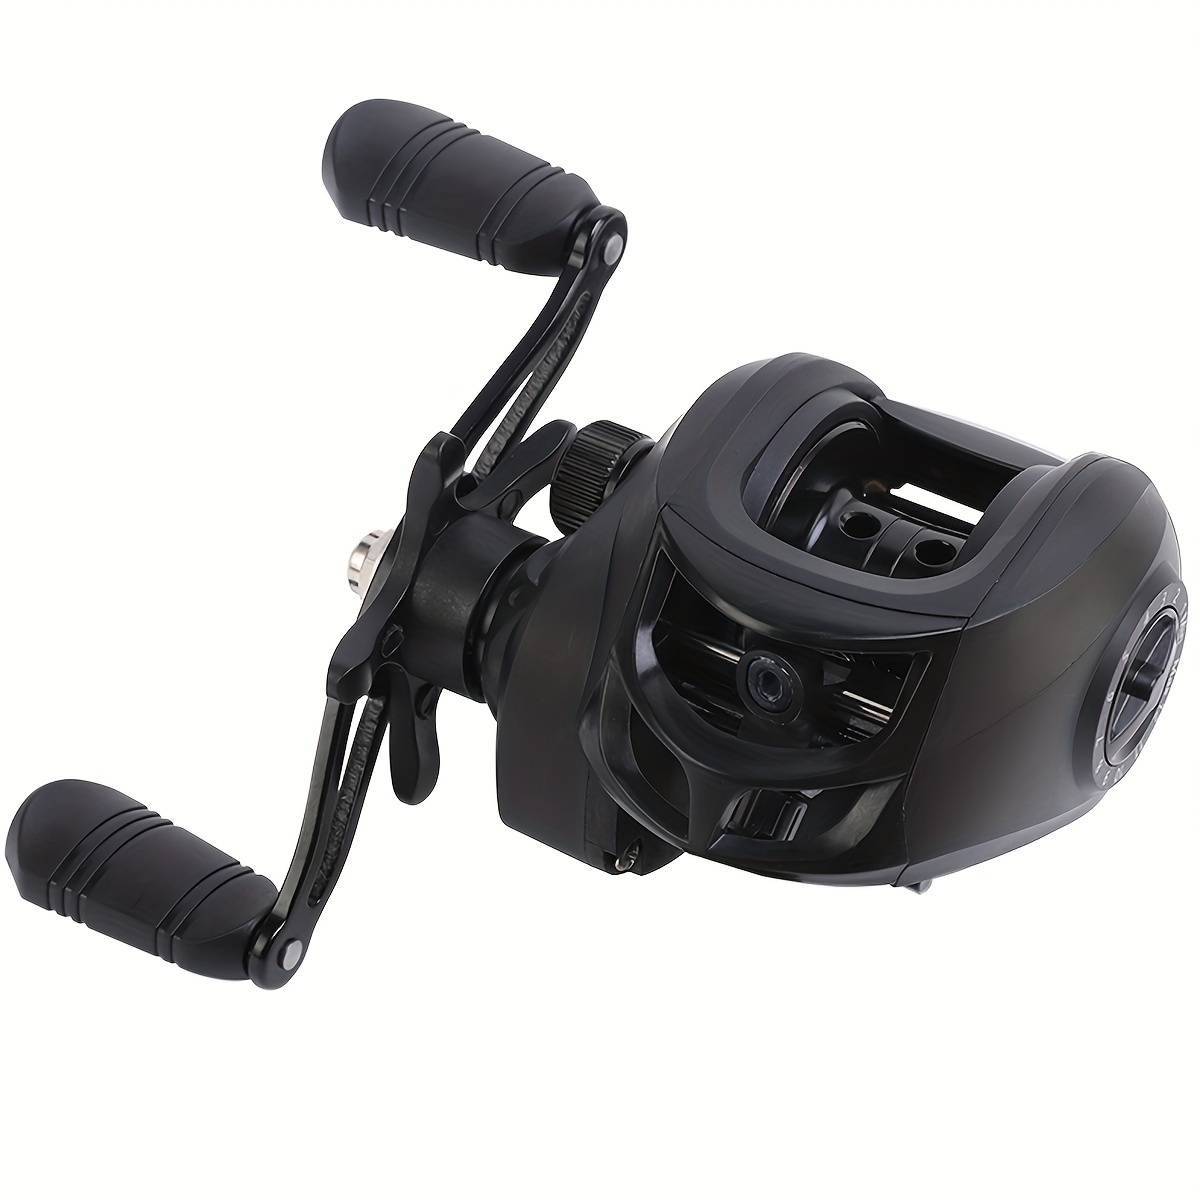 1pc Metal Left/Right Hand Baitcasting Reel, High Speed 8.1:1 Gear Ratio  Fishing Reel, Fishing Tackle For Freshwater Saltwater